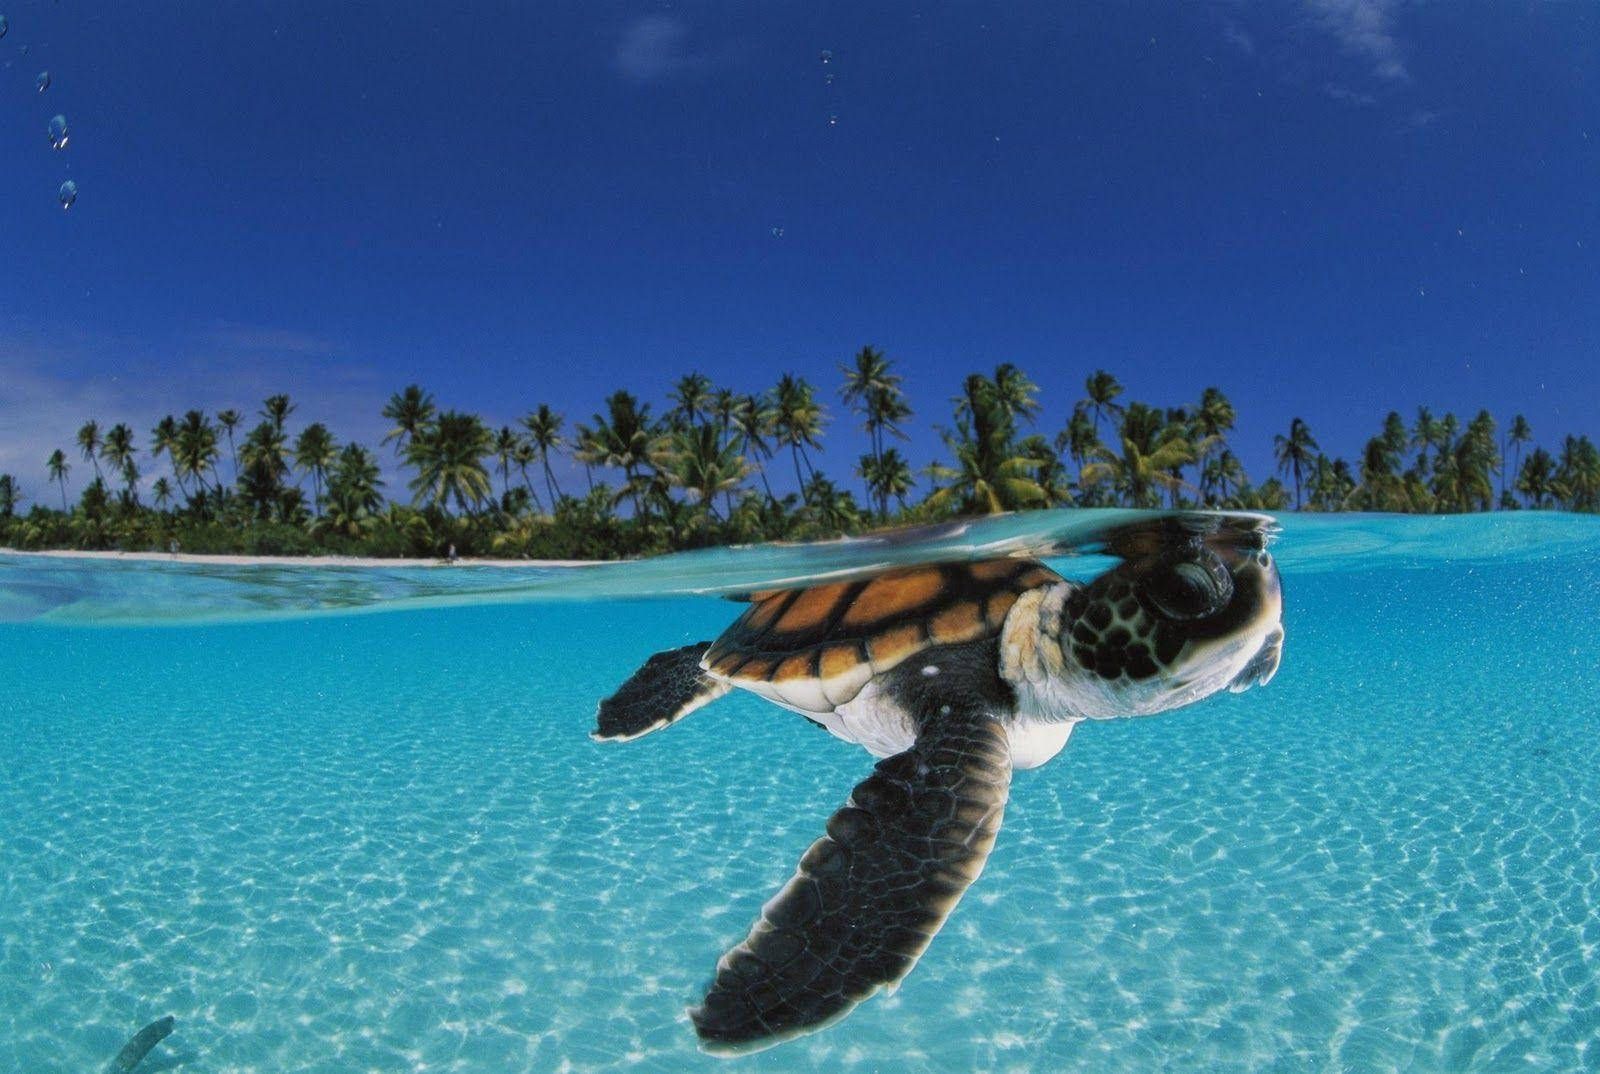 A turtle swimming in the ocean with palm trees - Sea turtle